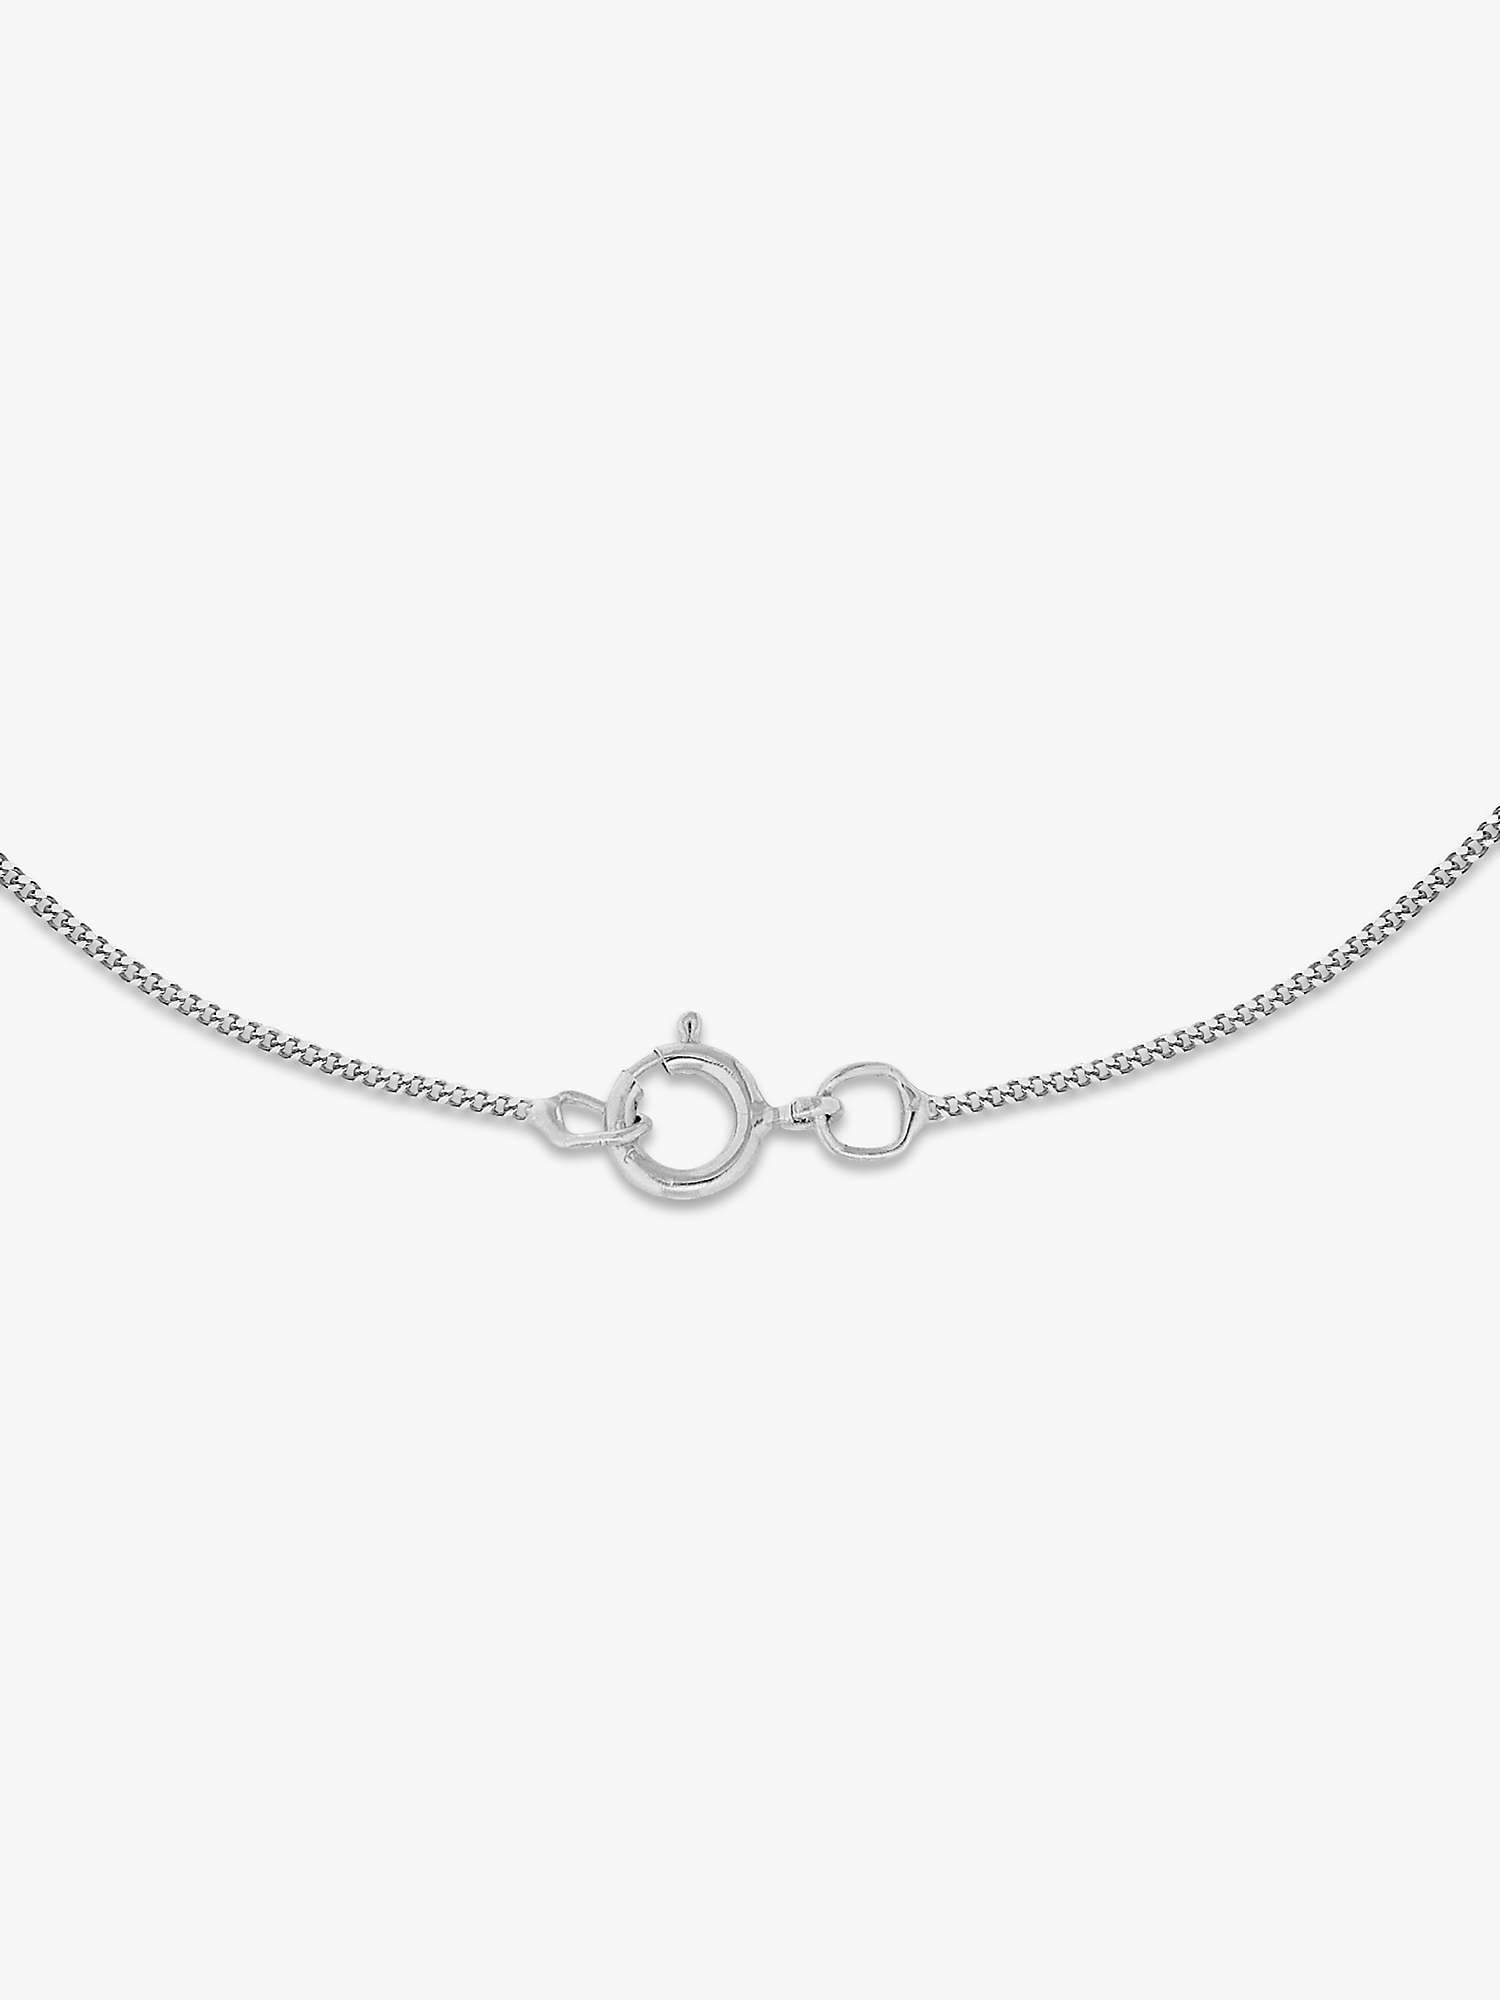 Buy IBB 9ct White Gold Curb Chain Trilogy Pendant Necklace, White Online at johnlewis.com